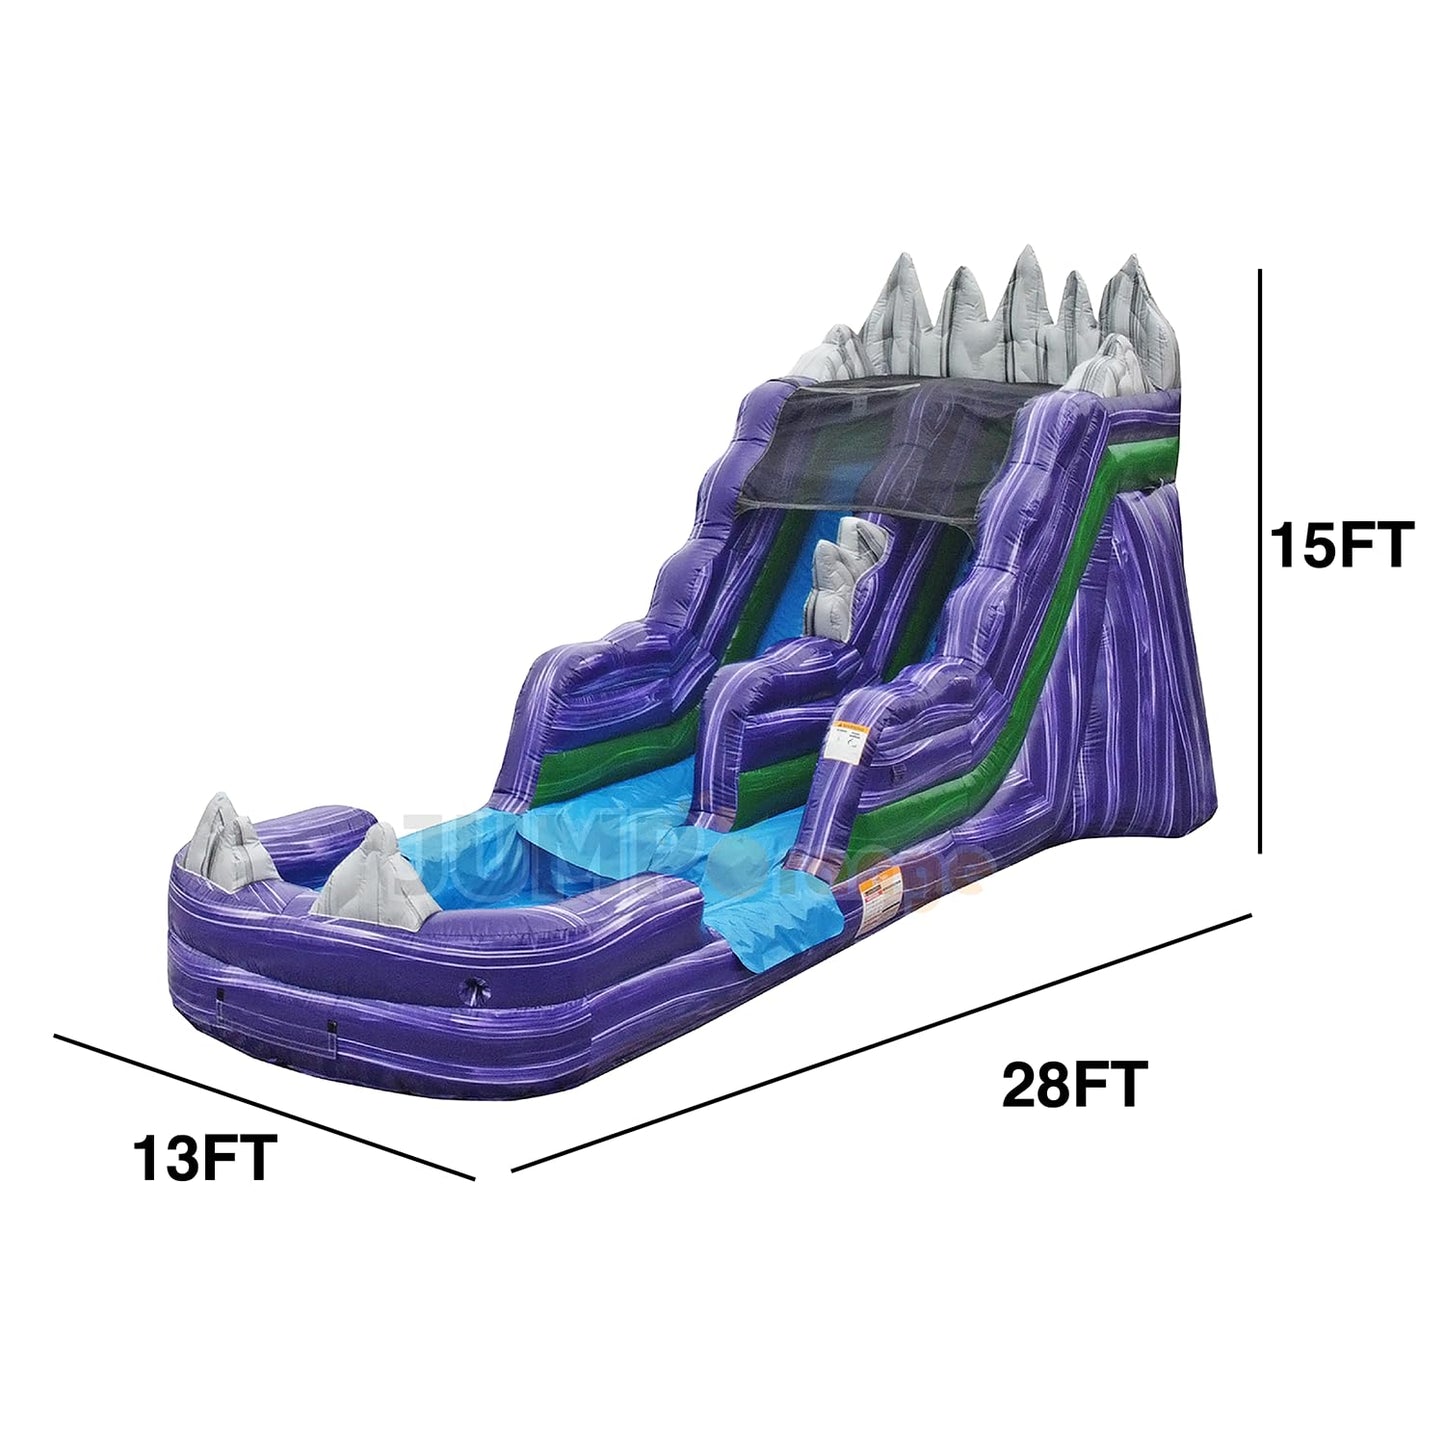 JumpOrange 15’ Dark Night Commercial Grade Water Slide with Splash Pool for Kids and Adults (with Blower), Outdoor Indoor, Wet Dry Use, Tall Inflatable